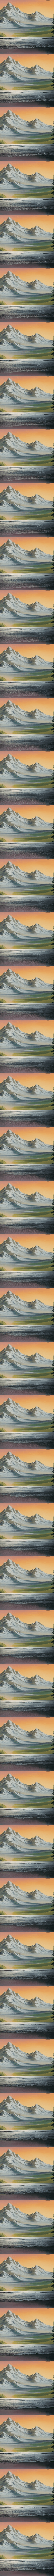 Bob Ross Remix collection image